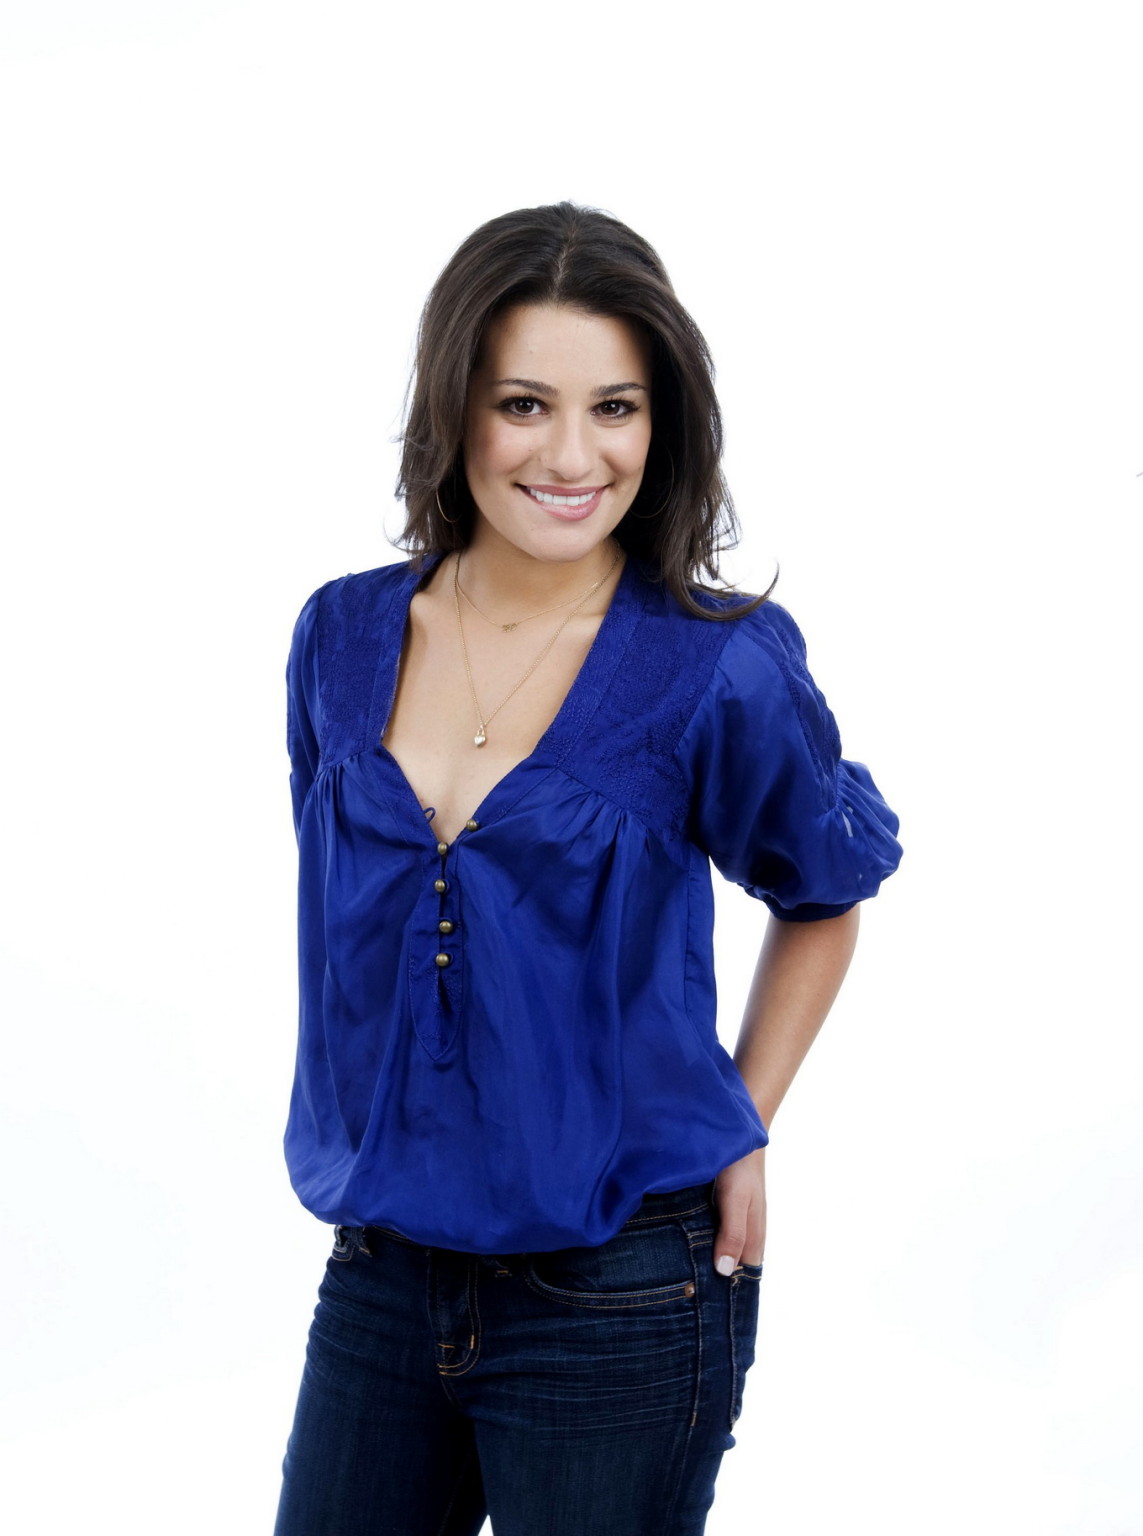 Lea Michele braless in wide open top for the Weekly Entertainment photoshoot #75320364